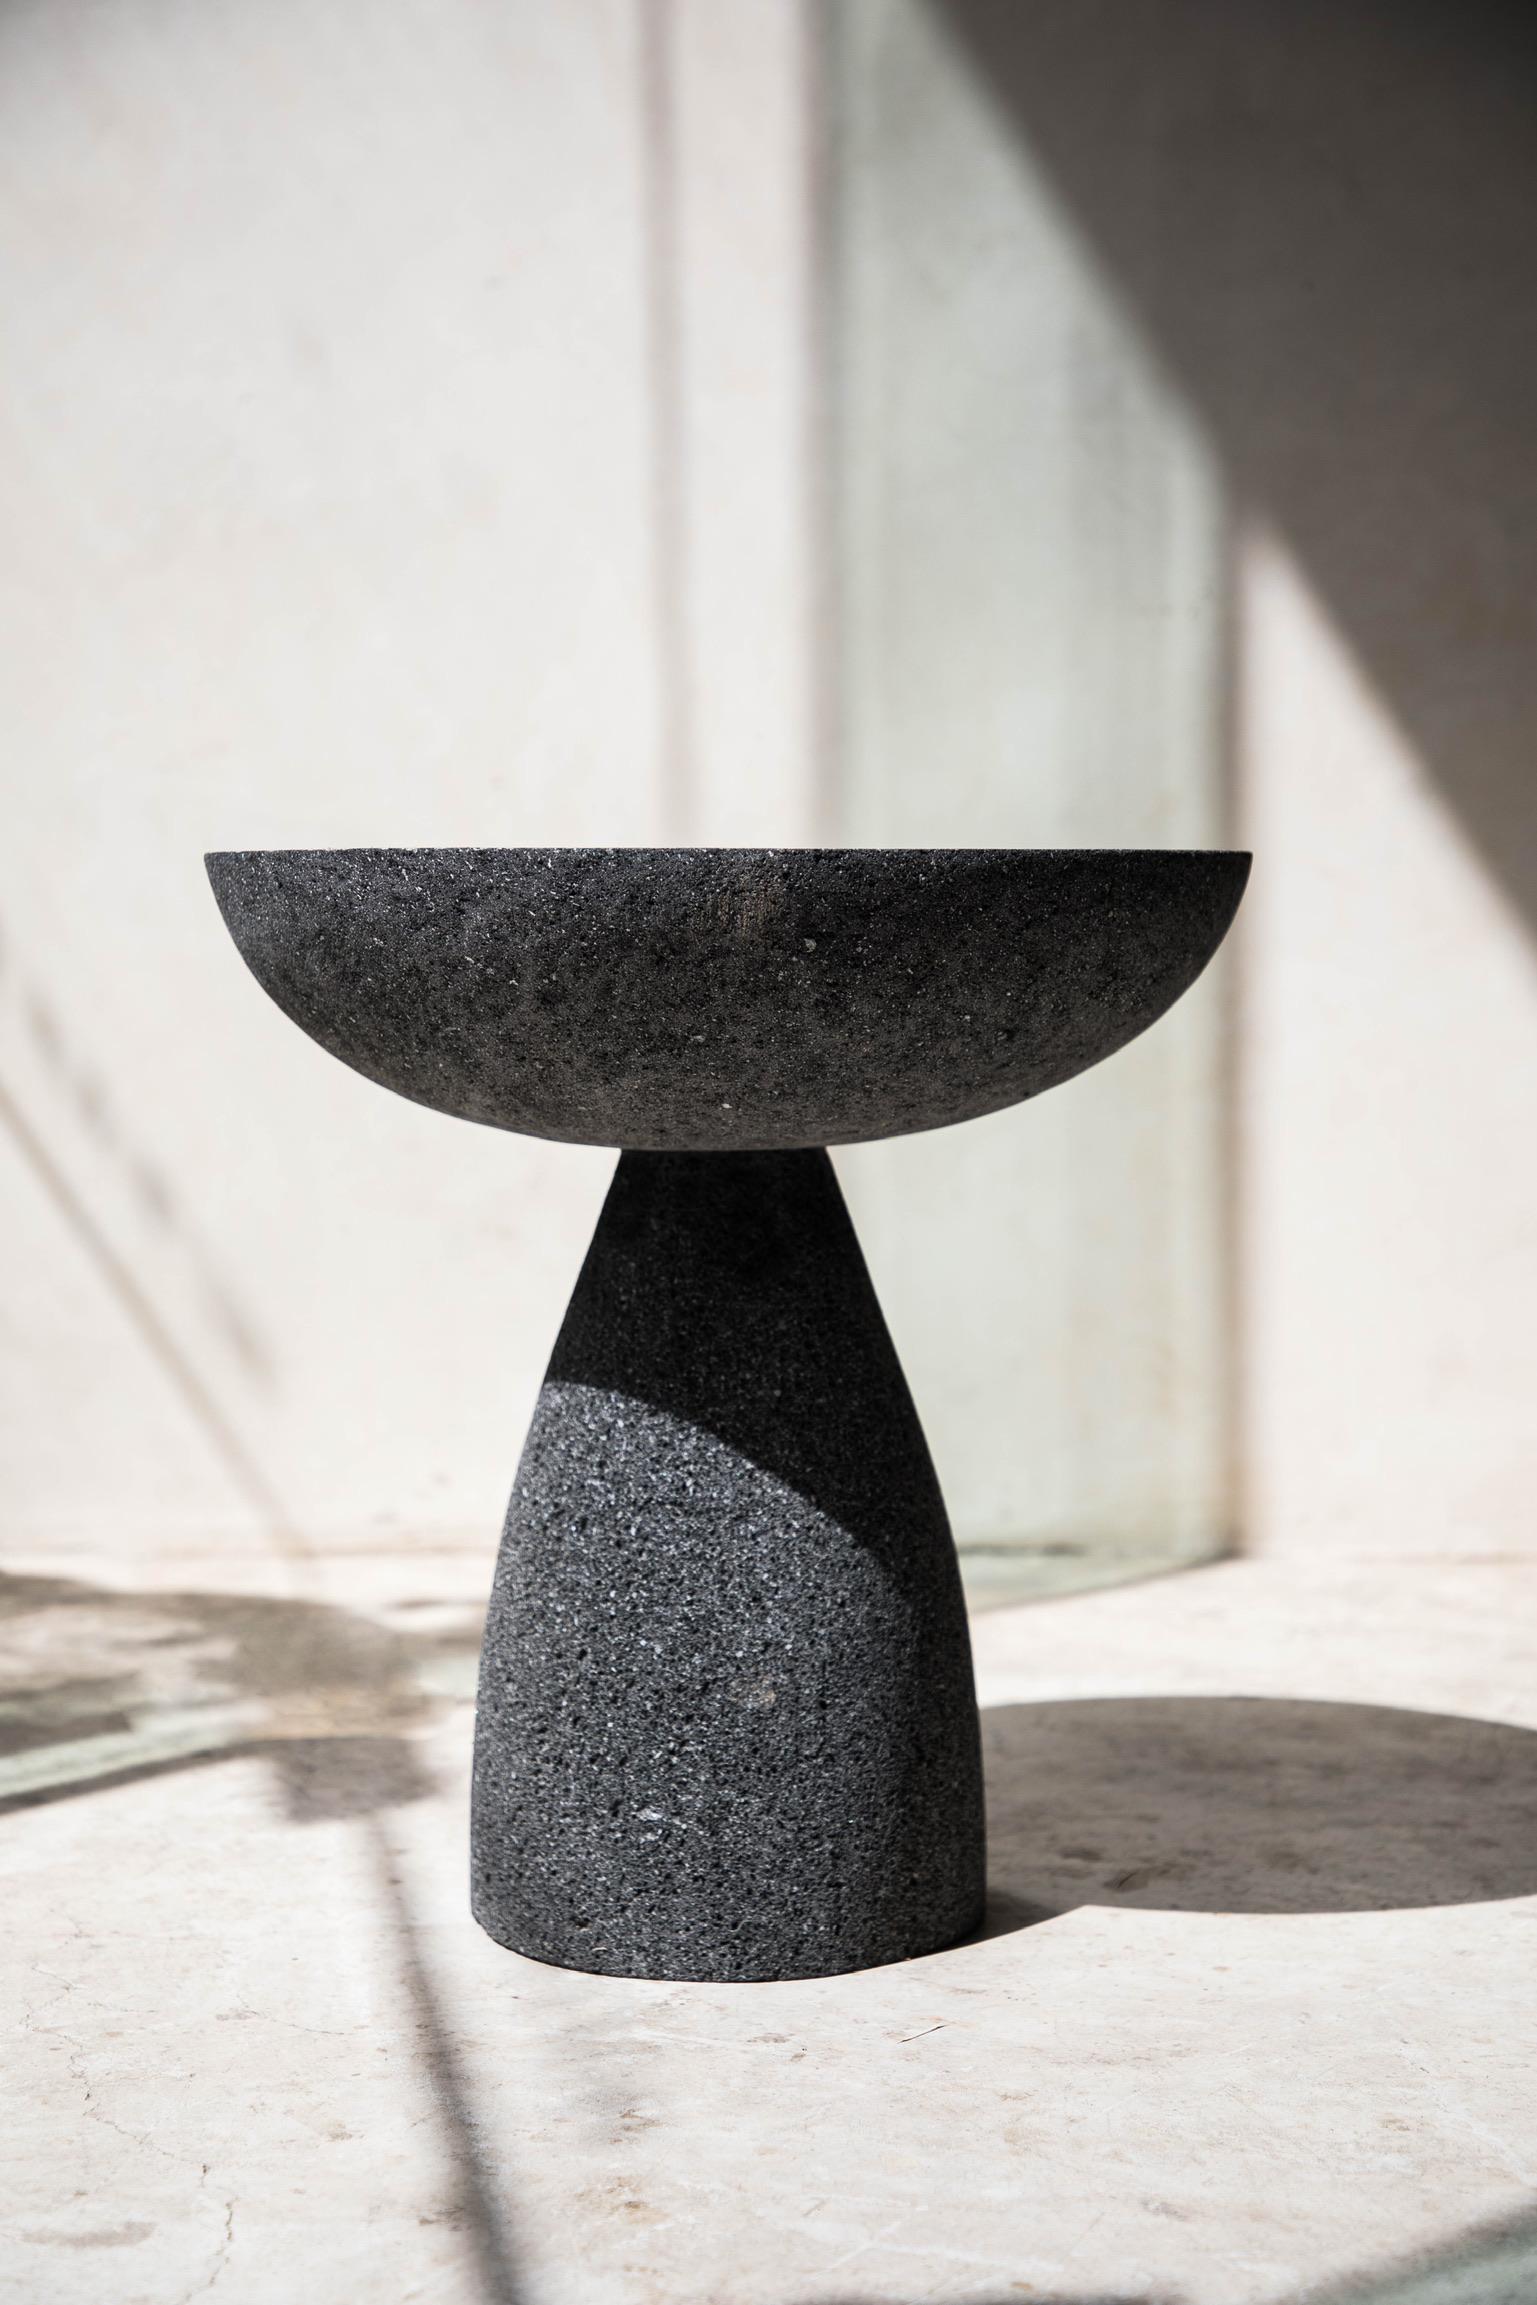 Stone totem 13 by Daniel Orozco
Material: Volcanic rock.
Dimensions: D 35 x H 45 cm

Volvanic rock Totem.

Daniel Orozco Estudio
We are an inclusive interior design estudio, who love to work with fabrics and natural textiles in makes our spaces